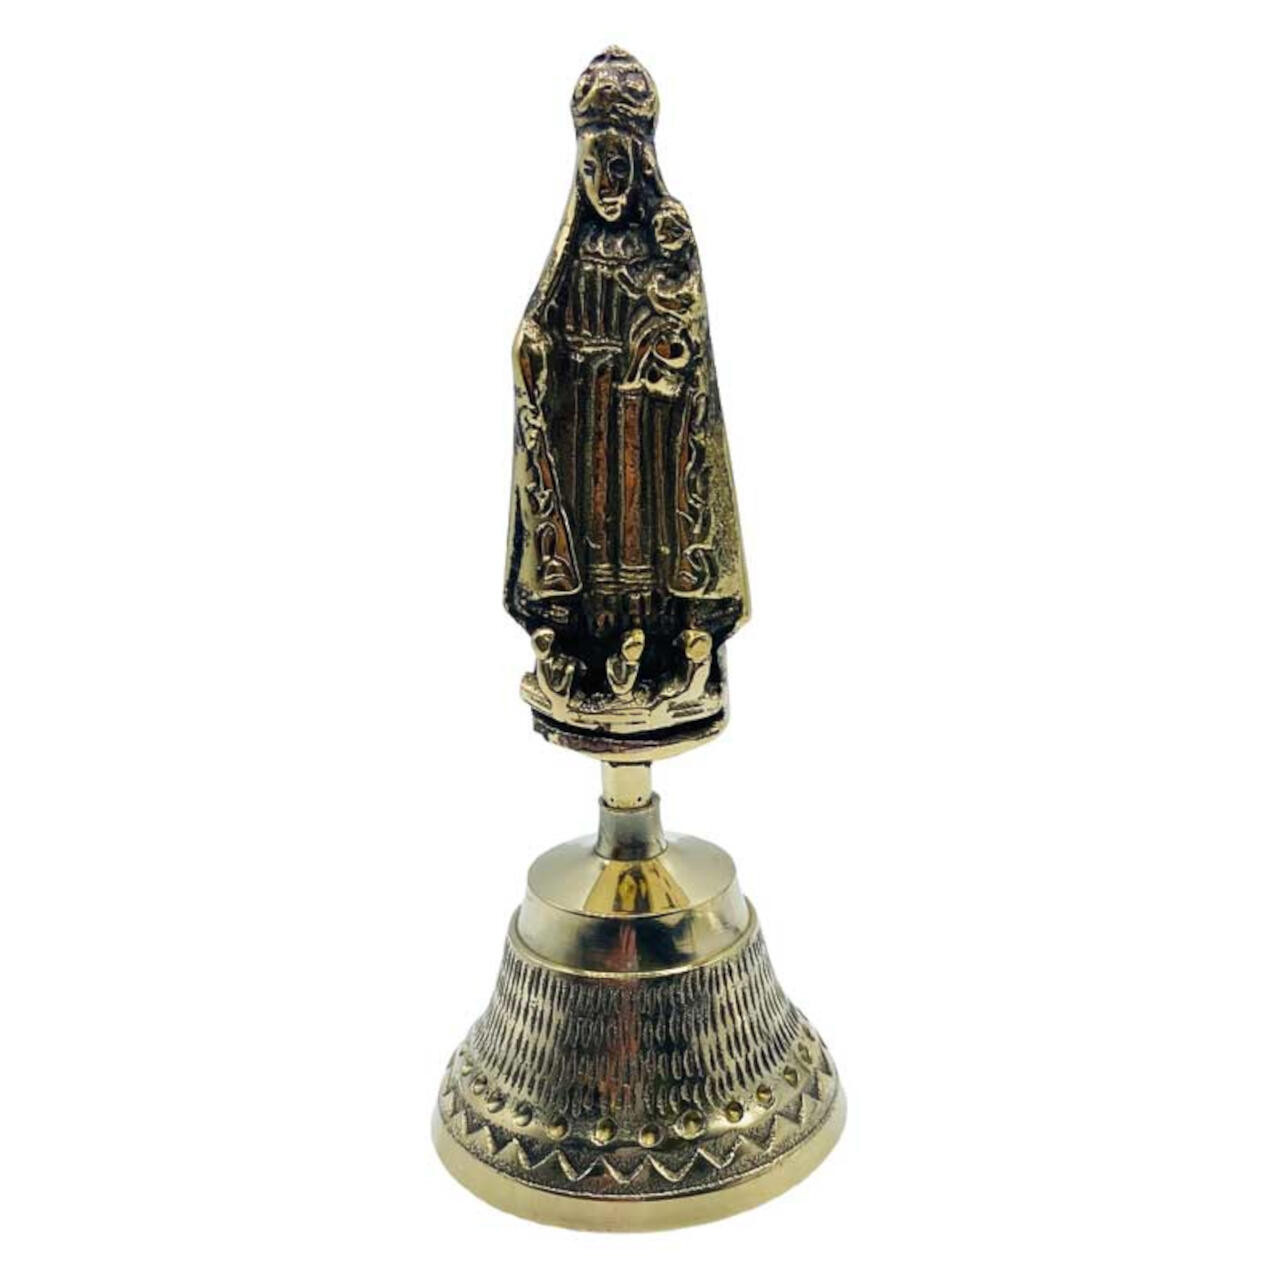 Our Lady Of Charity Bell 6 1/4"